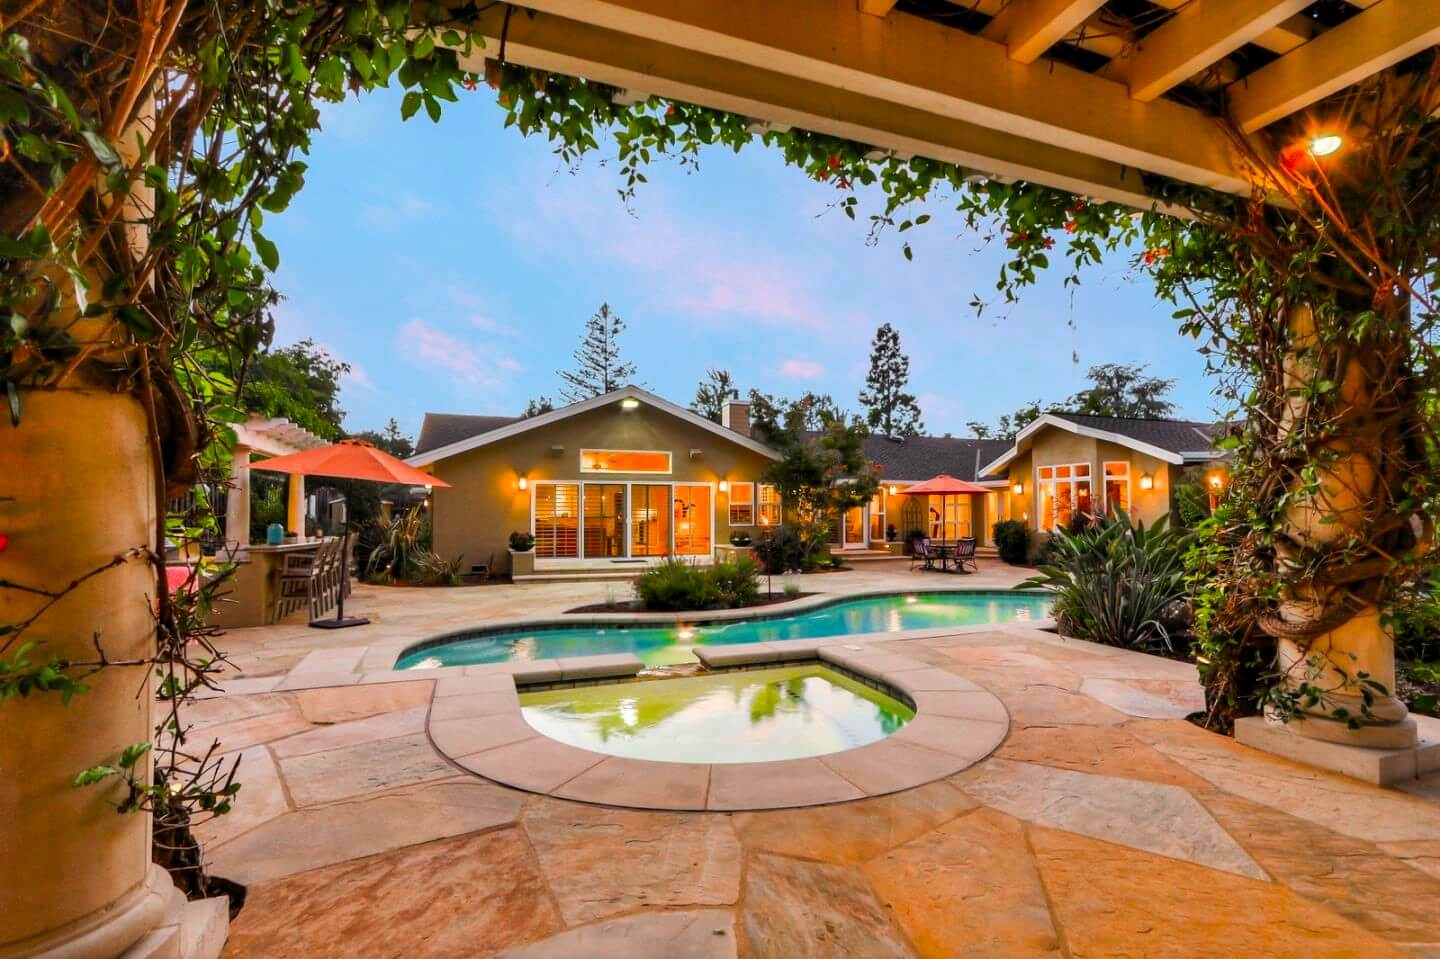 Hot tub at night with view of gorgeous backyard swimming pool and flagstone paver patio of beautiful California home